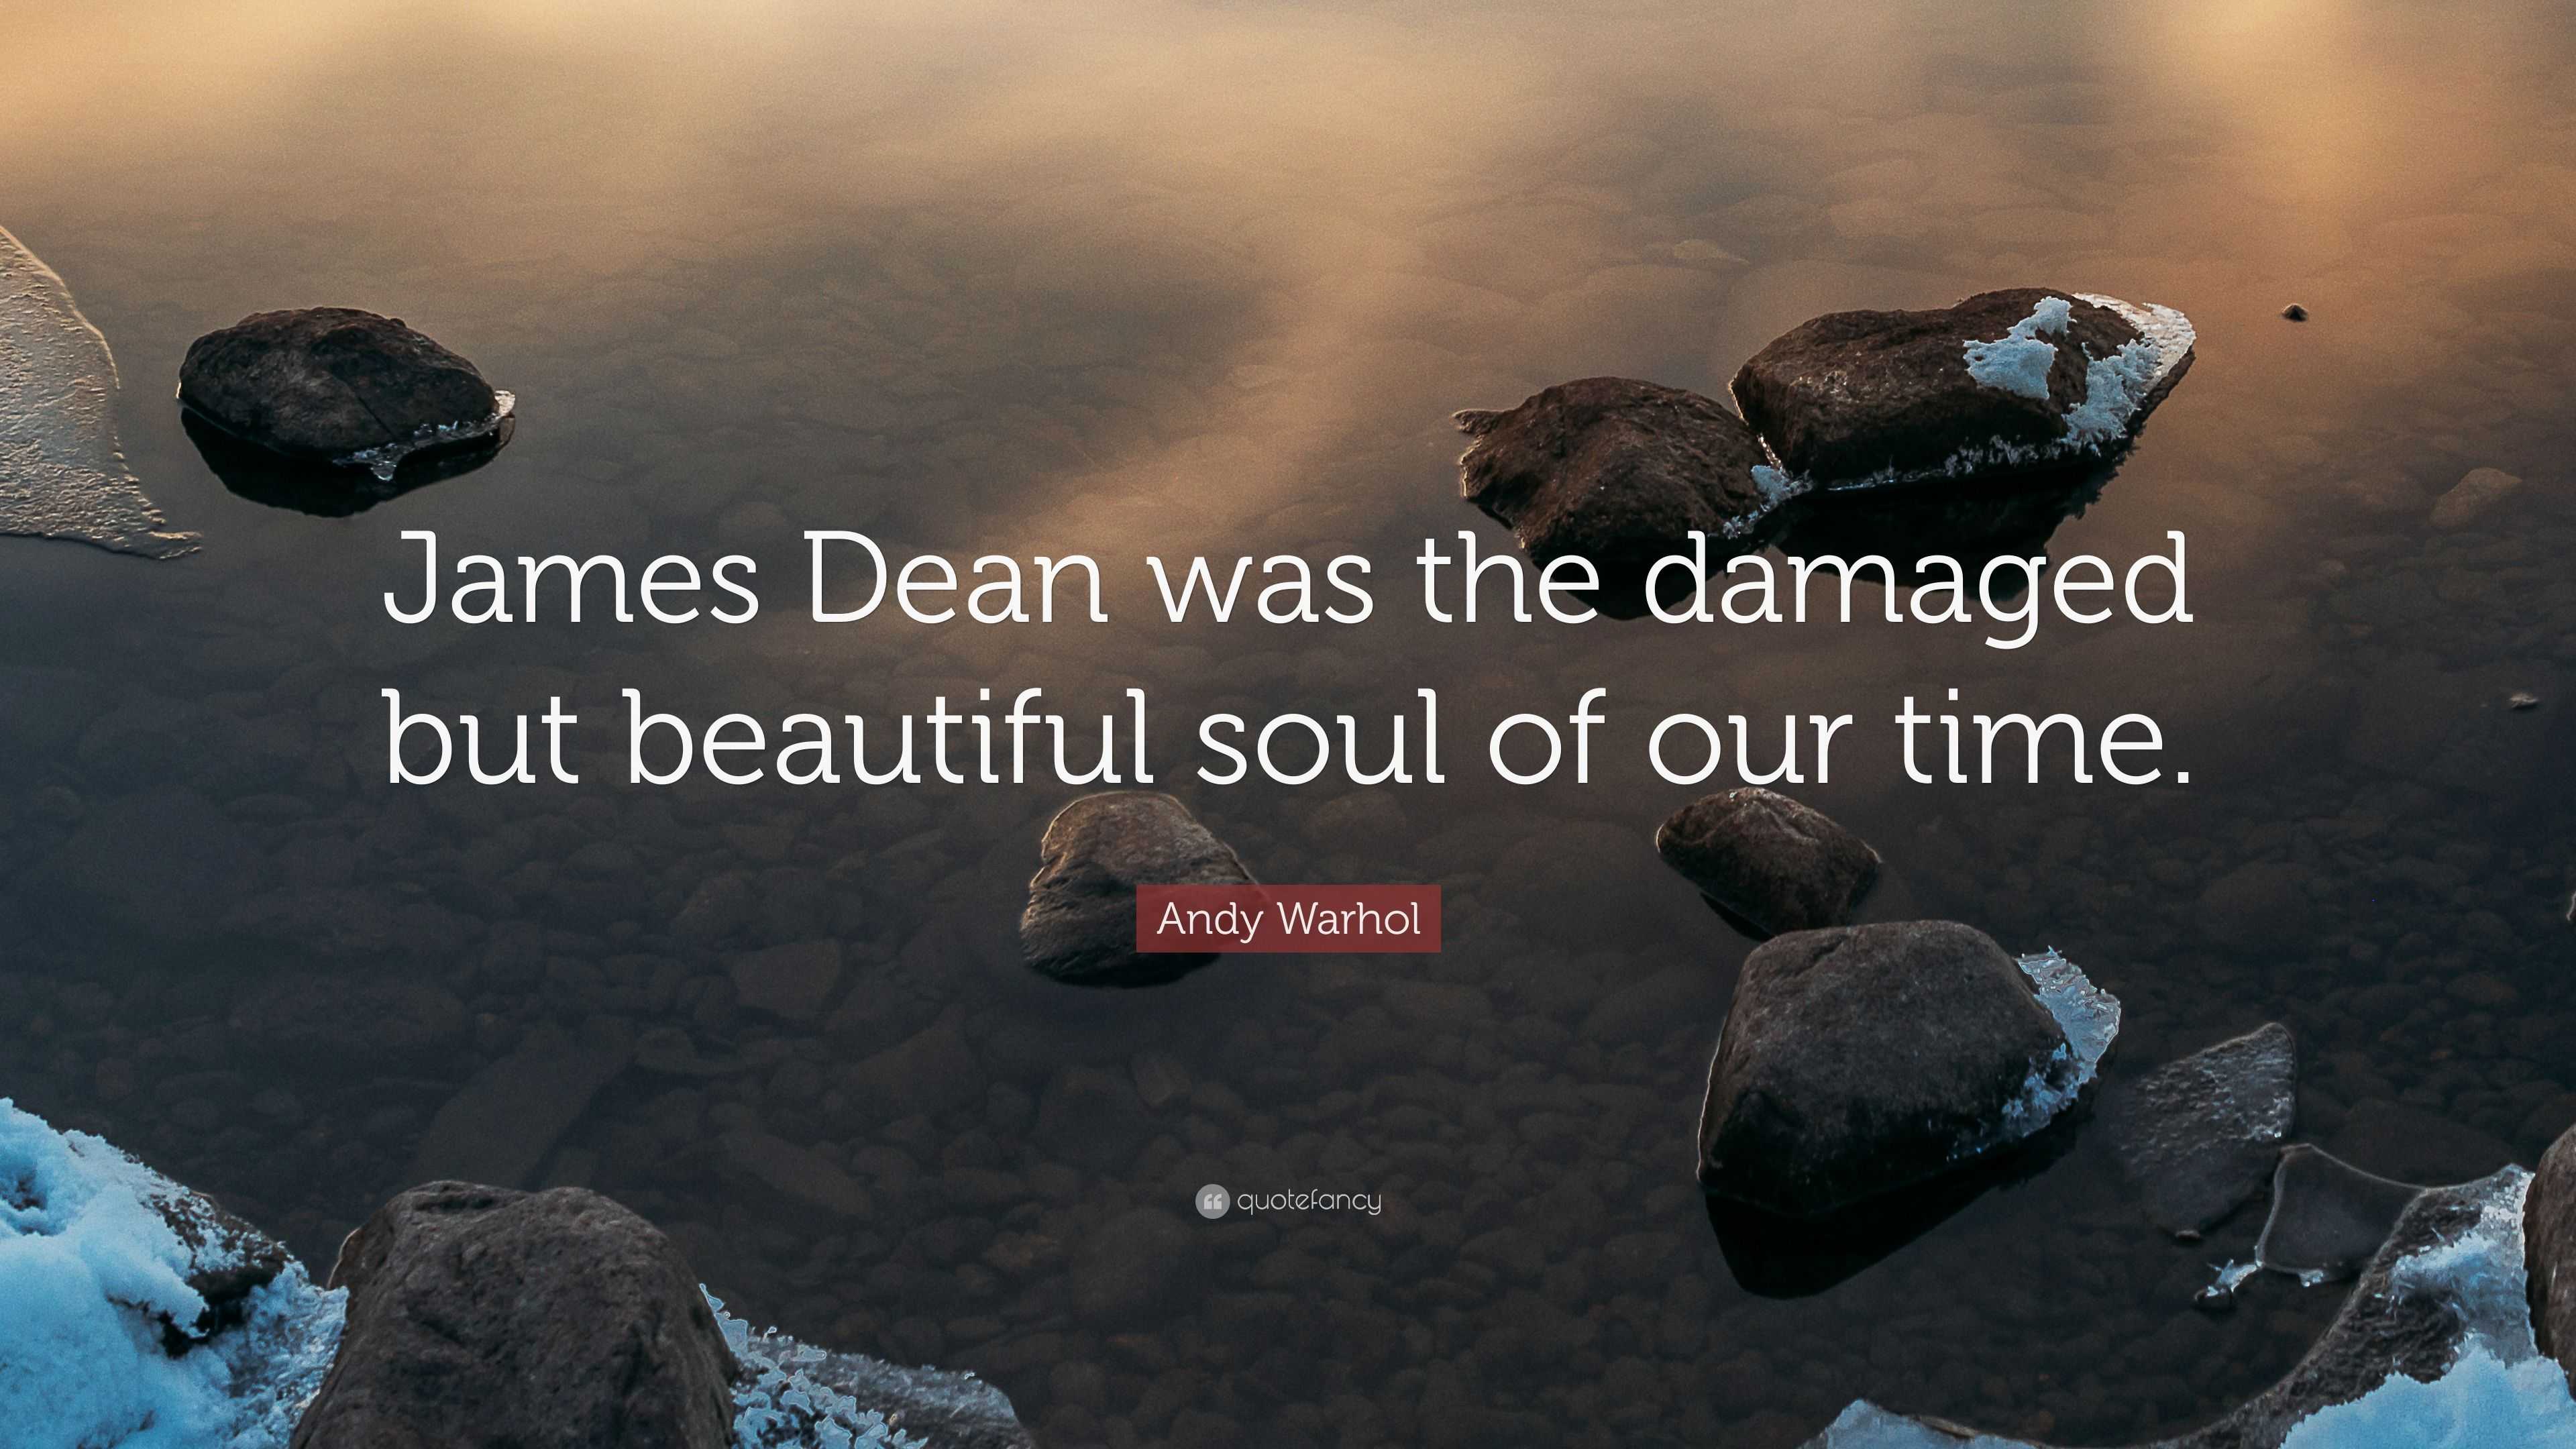 Andy Warhol Quote James Dean Was The Damaged But Beautiful Soul Of Our Time